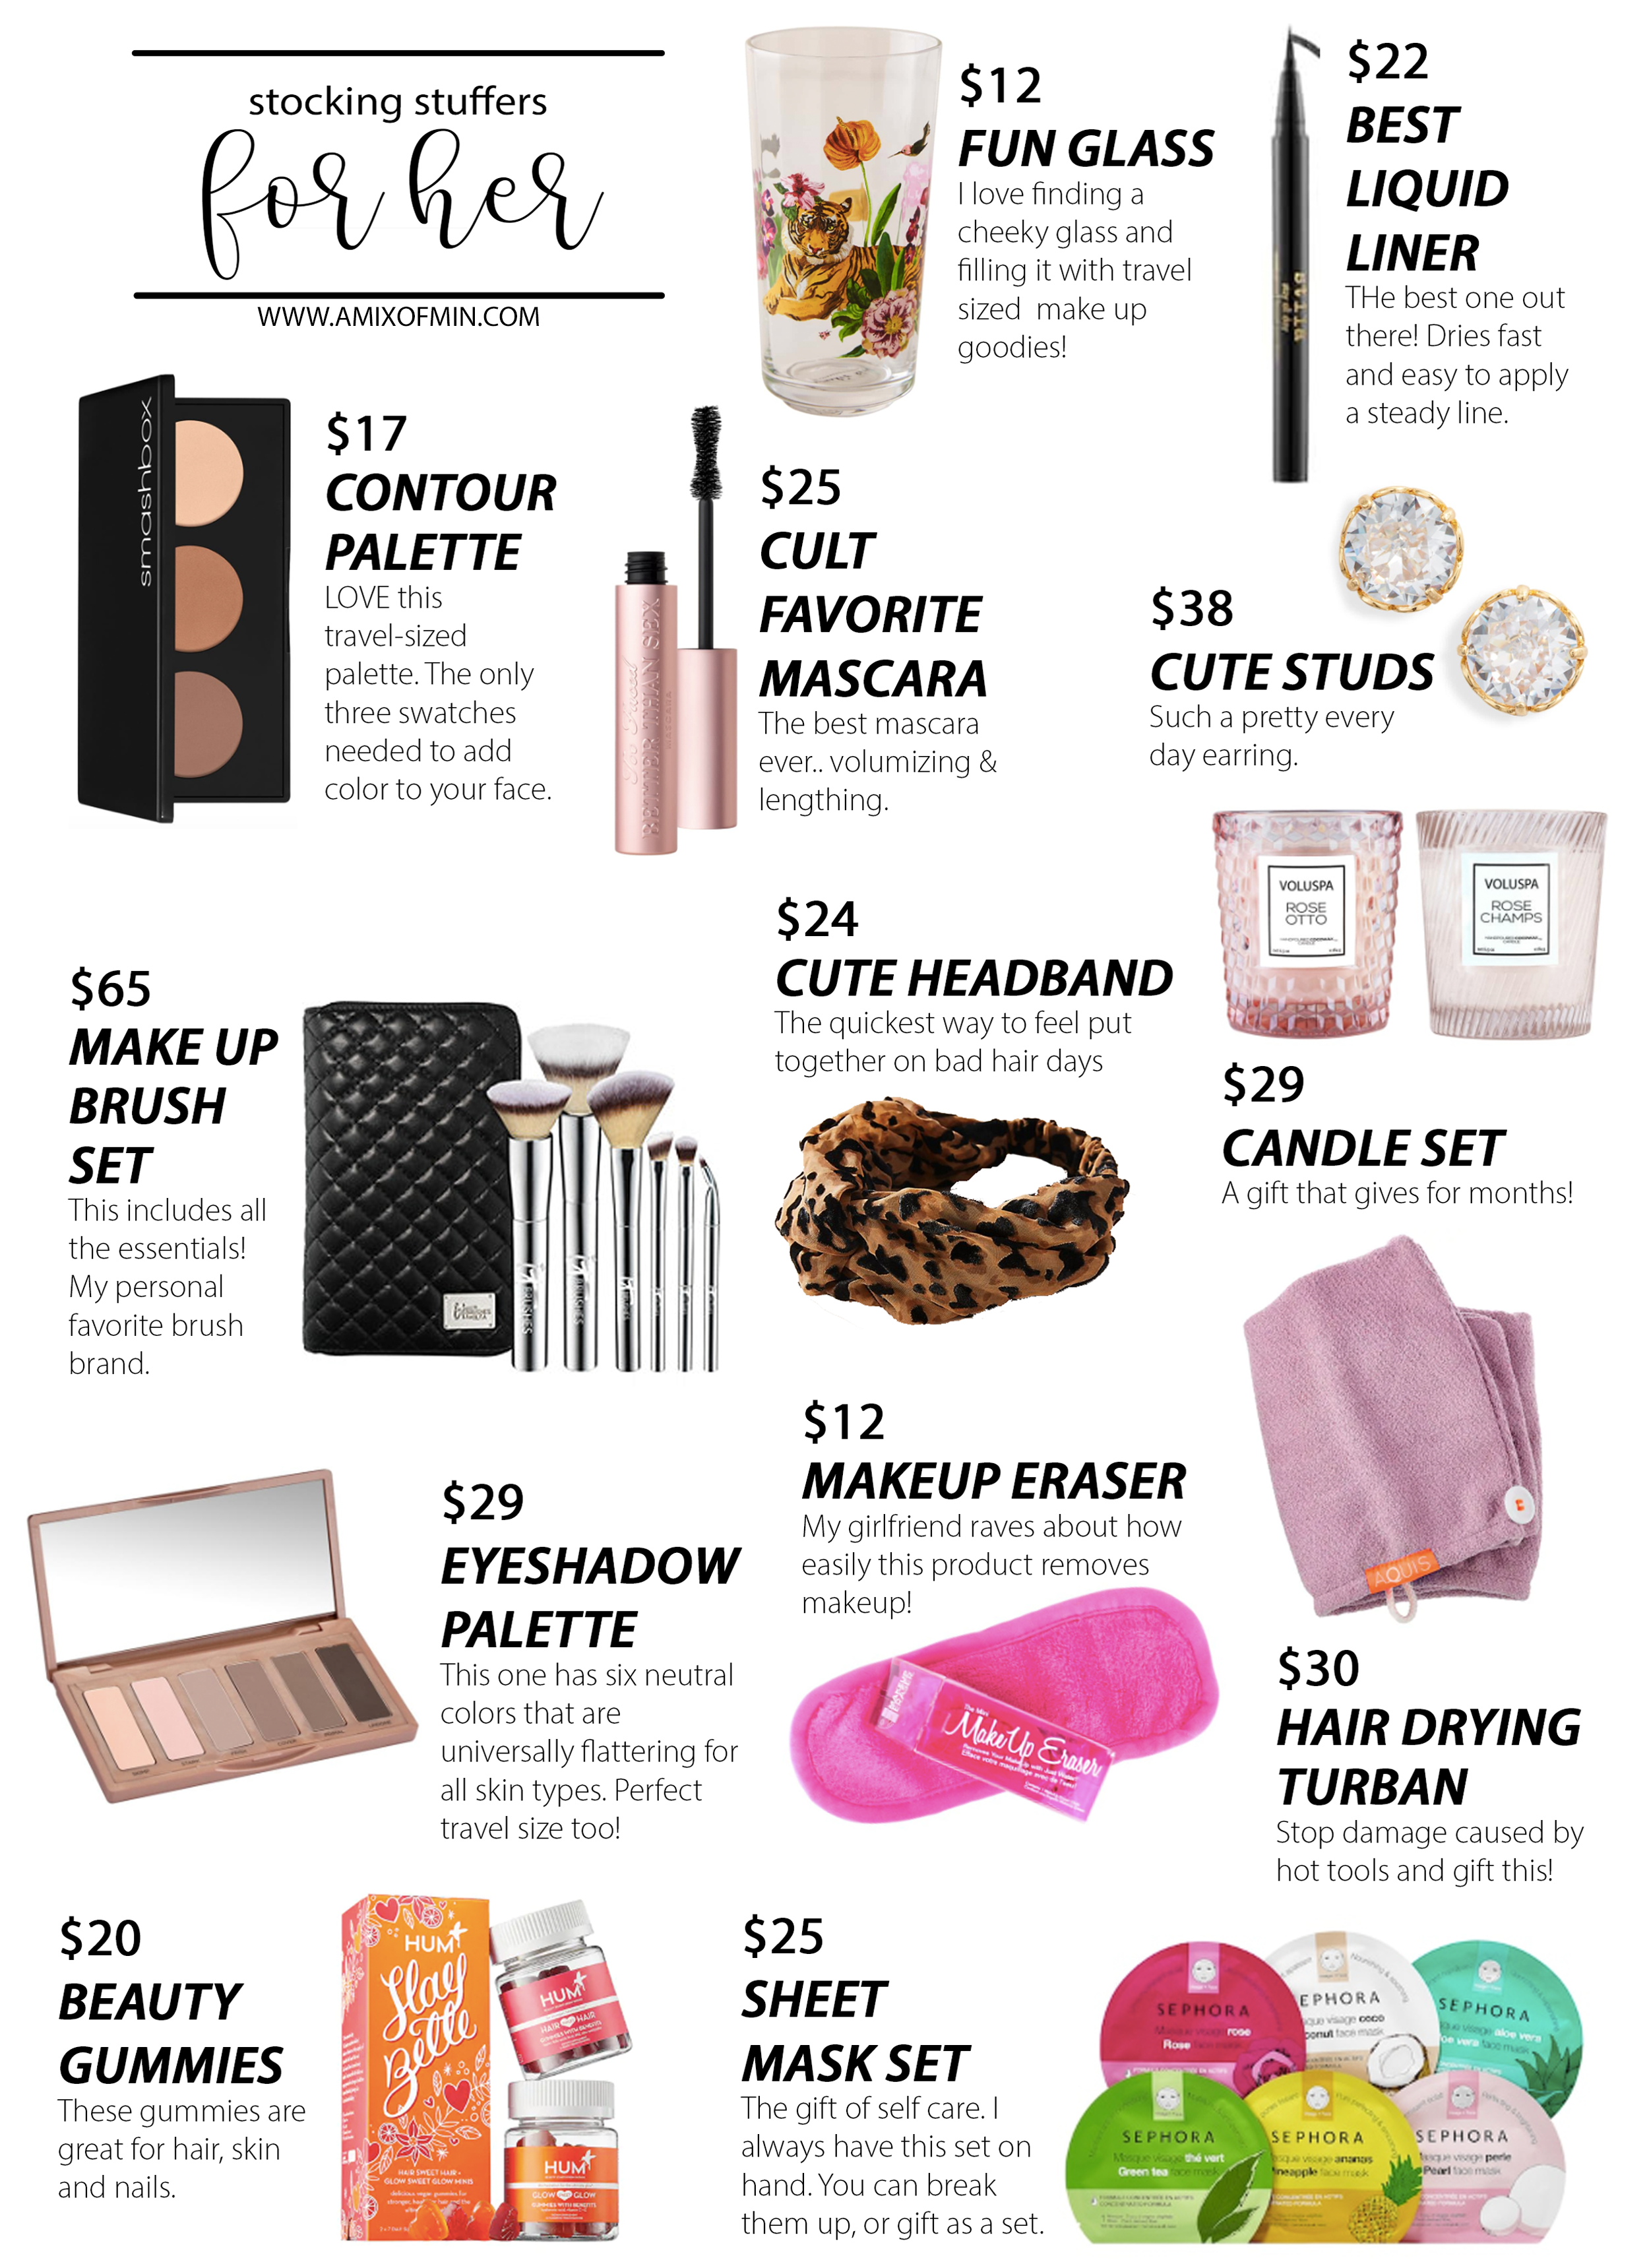 HOLIDAY GIFT GUIDE FOR HER